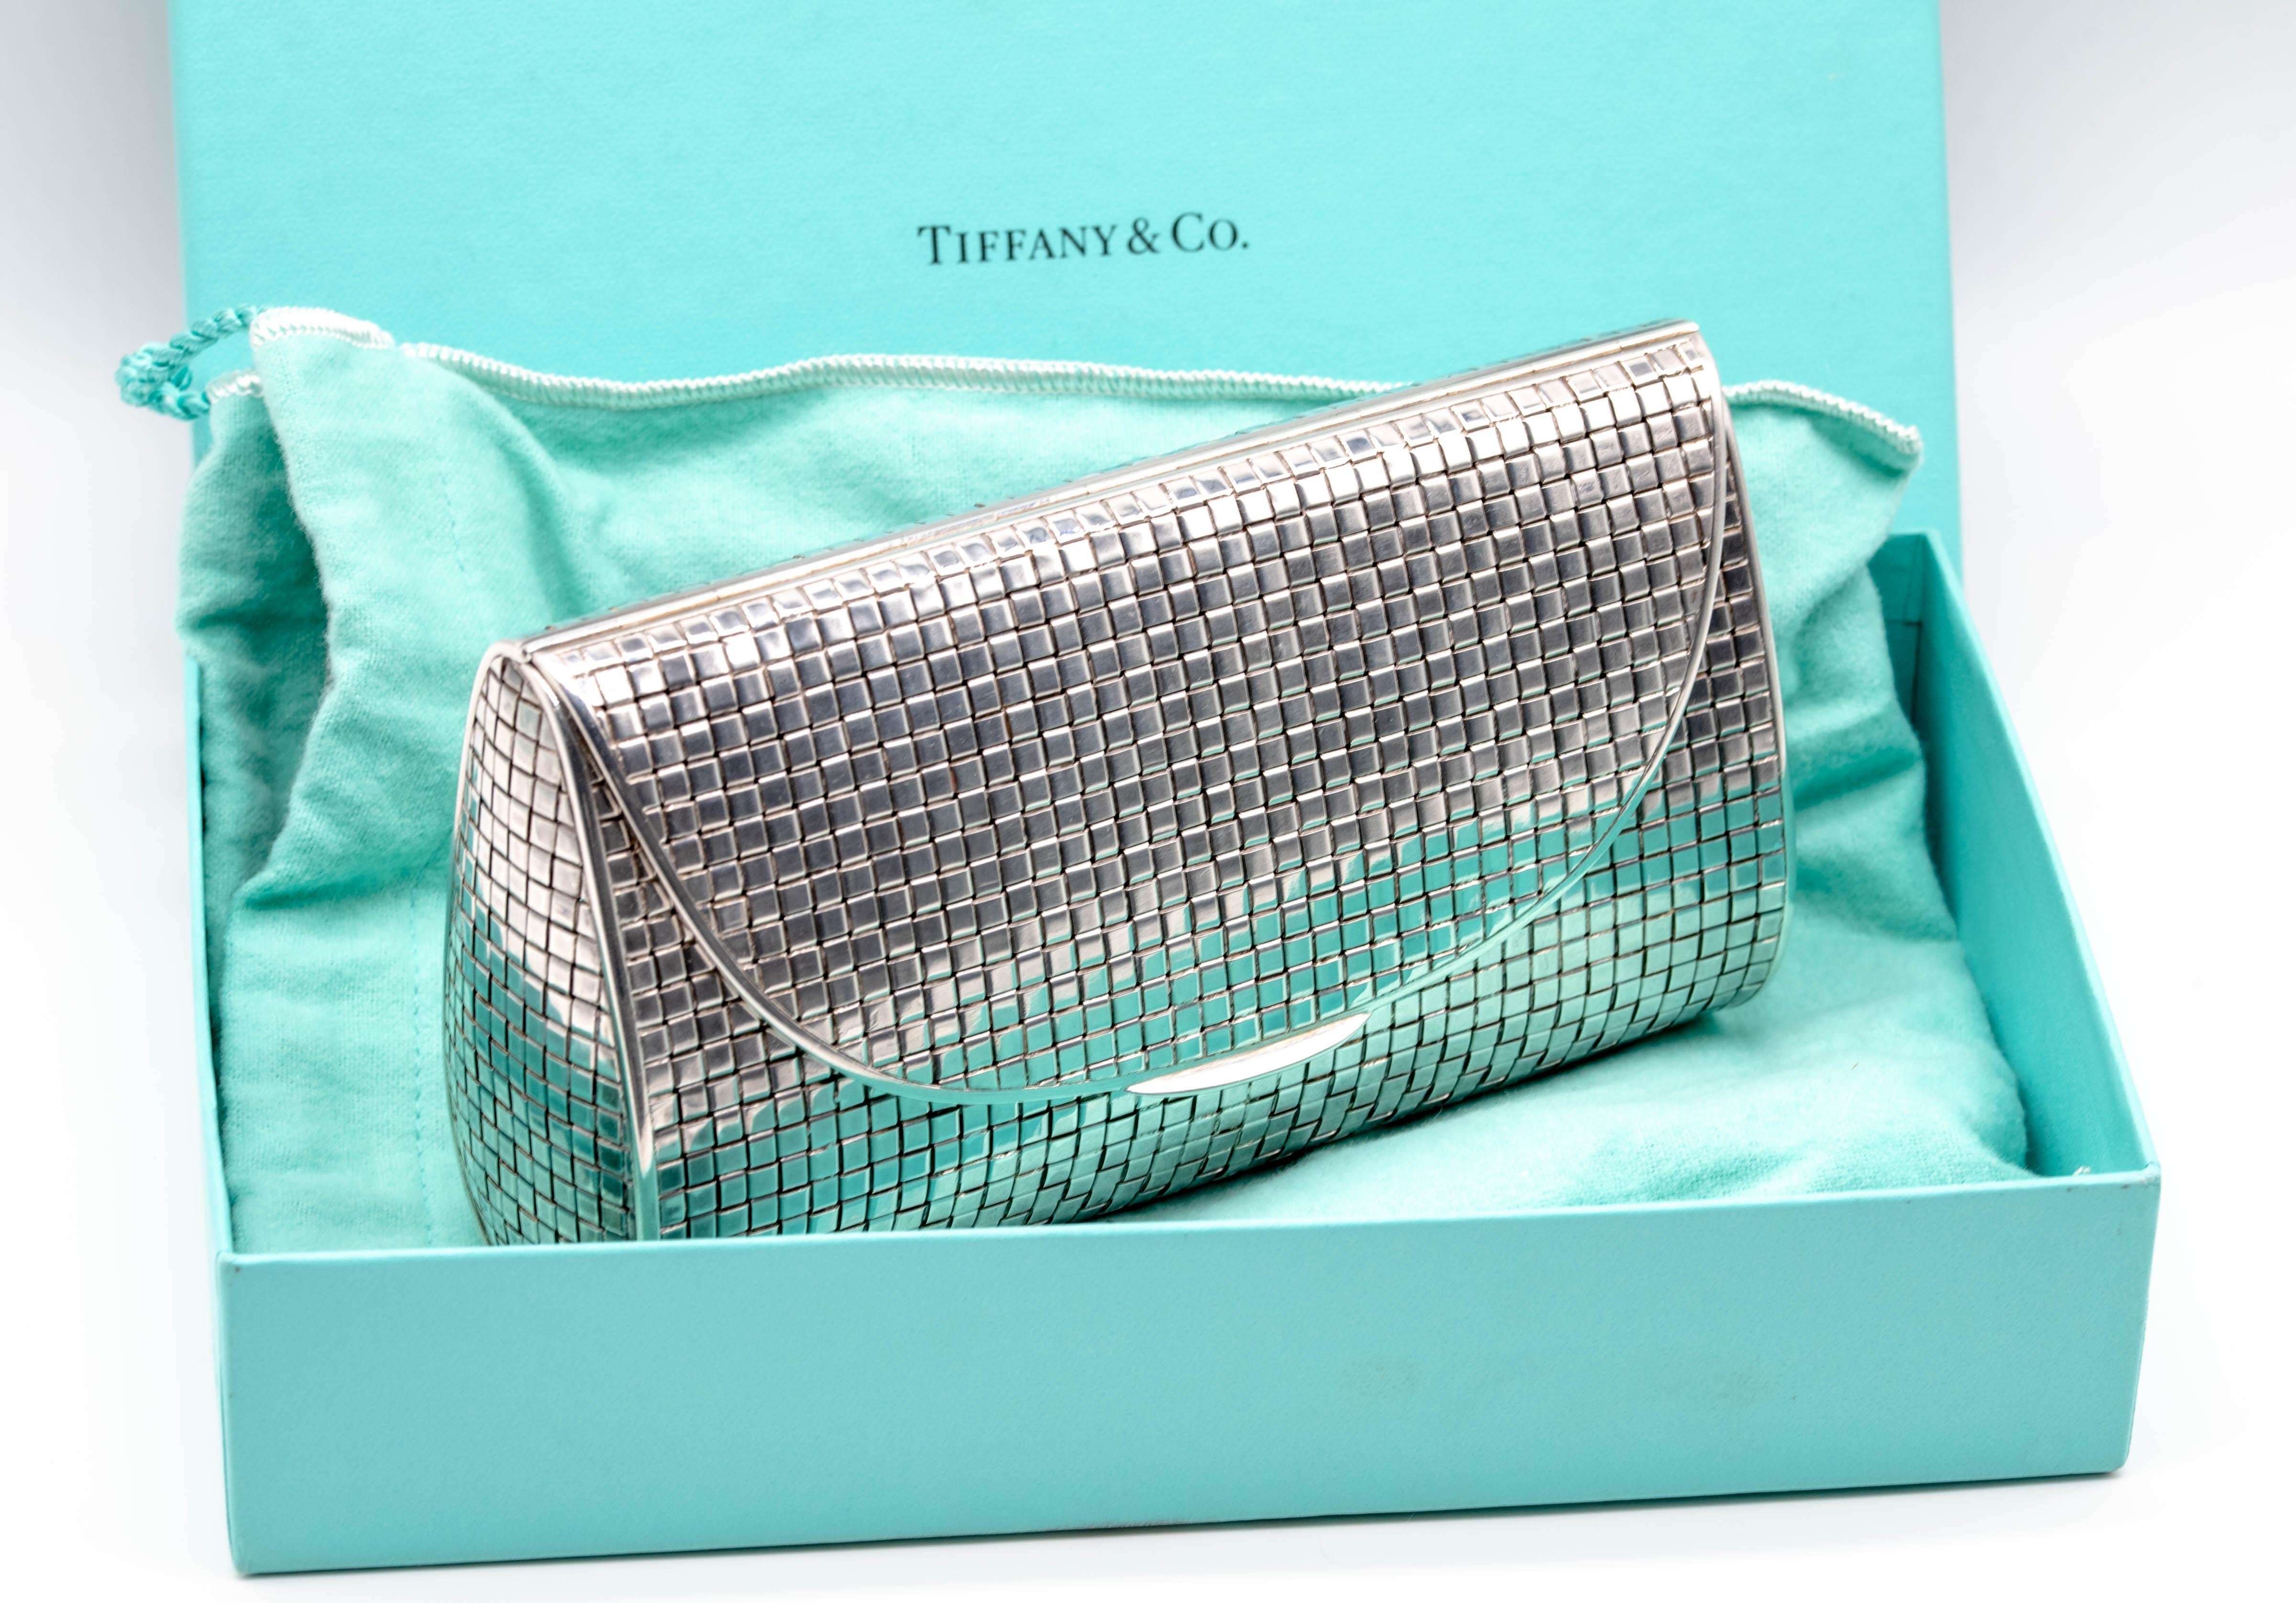 A covetable clutch from the venerable firm of Tiffany & Co, this adorable little purse can contain a surprising amount of evening necessities.  The snap closure pulls up on the dual hinges at the sides and when you access the inside, you can